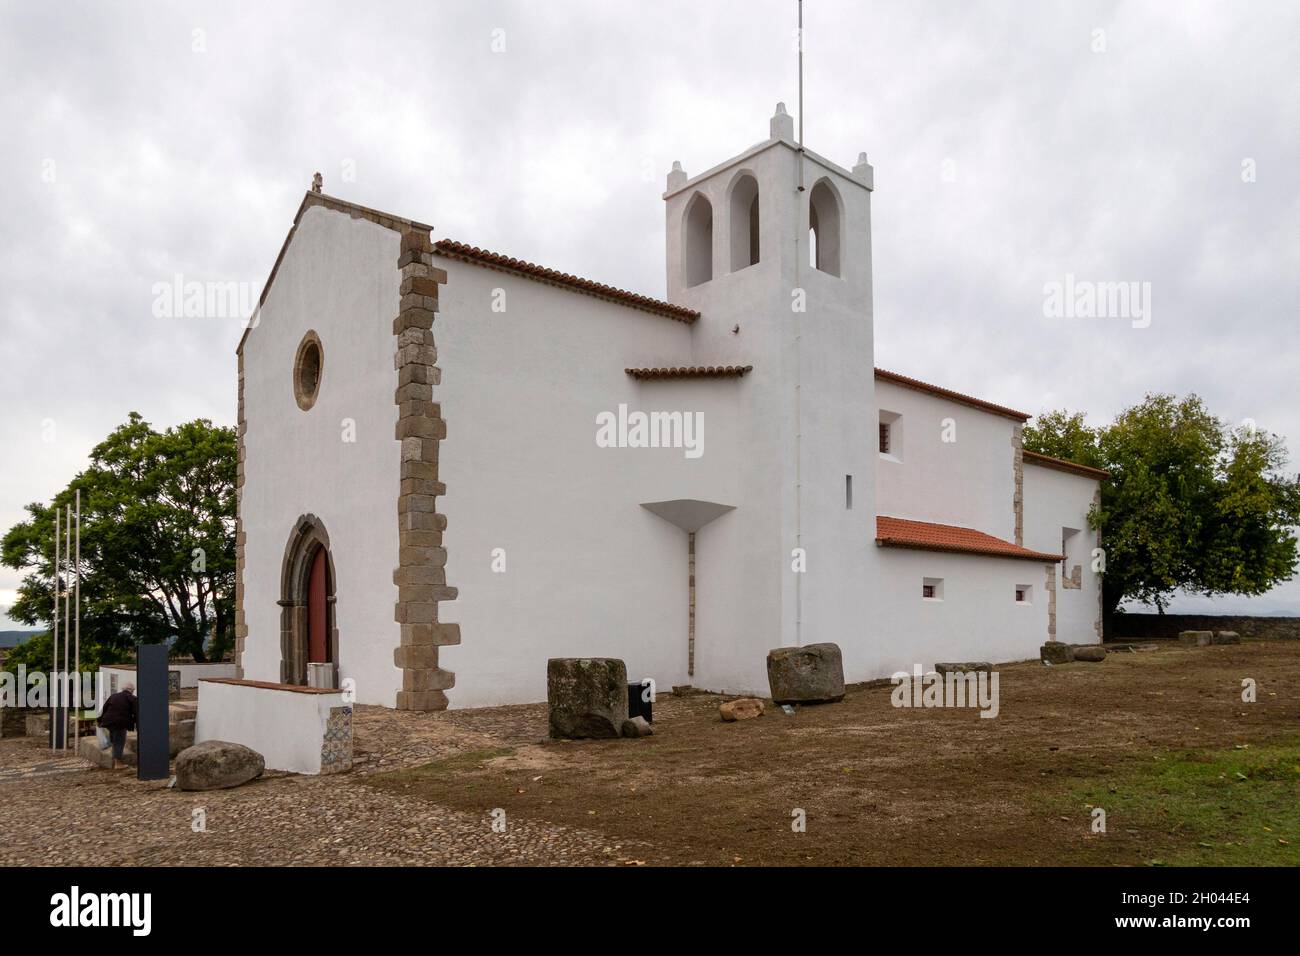 The ancient church of Santa Maria do Castelo, located in a central level area within the castle walls in Abrantes, Portugal, Europe Stock Photo